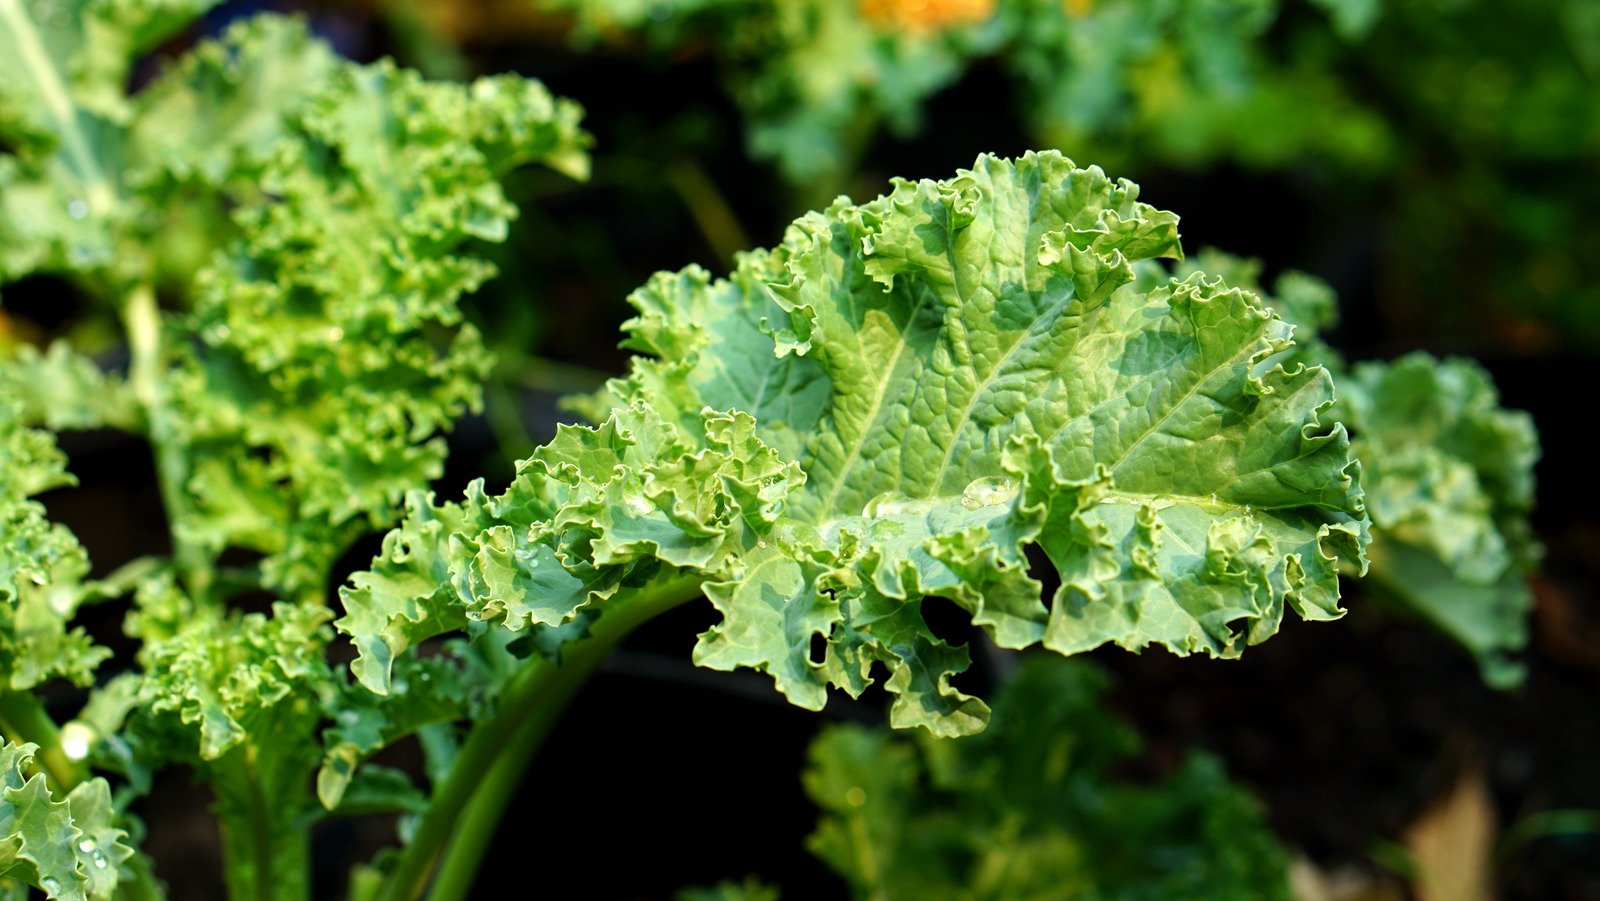 https://www.healthdigest.com/img/gallery/when-you-eat-too-much-kale-this-is-what-happens-to-you/l-intro-1638985559.jpg